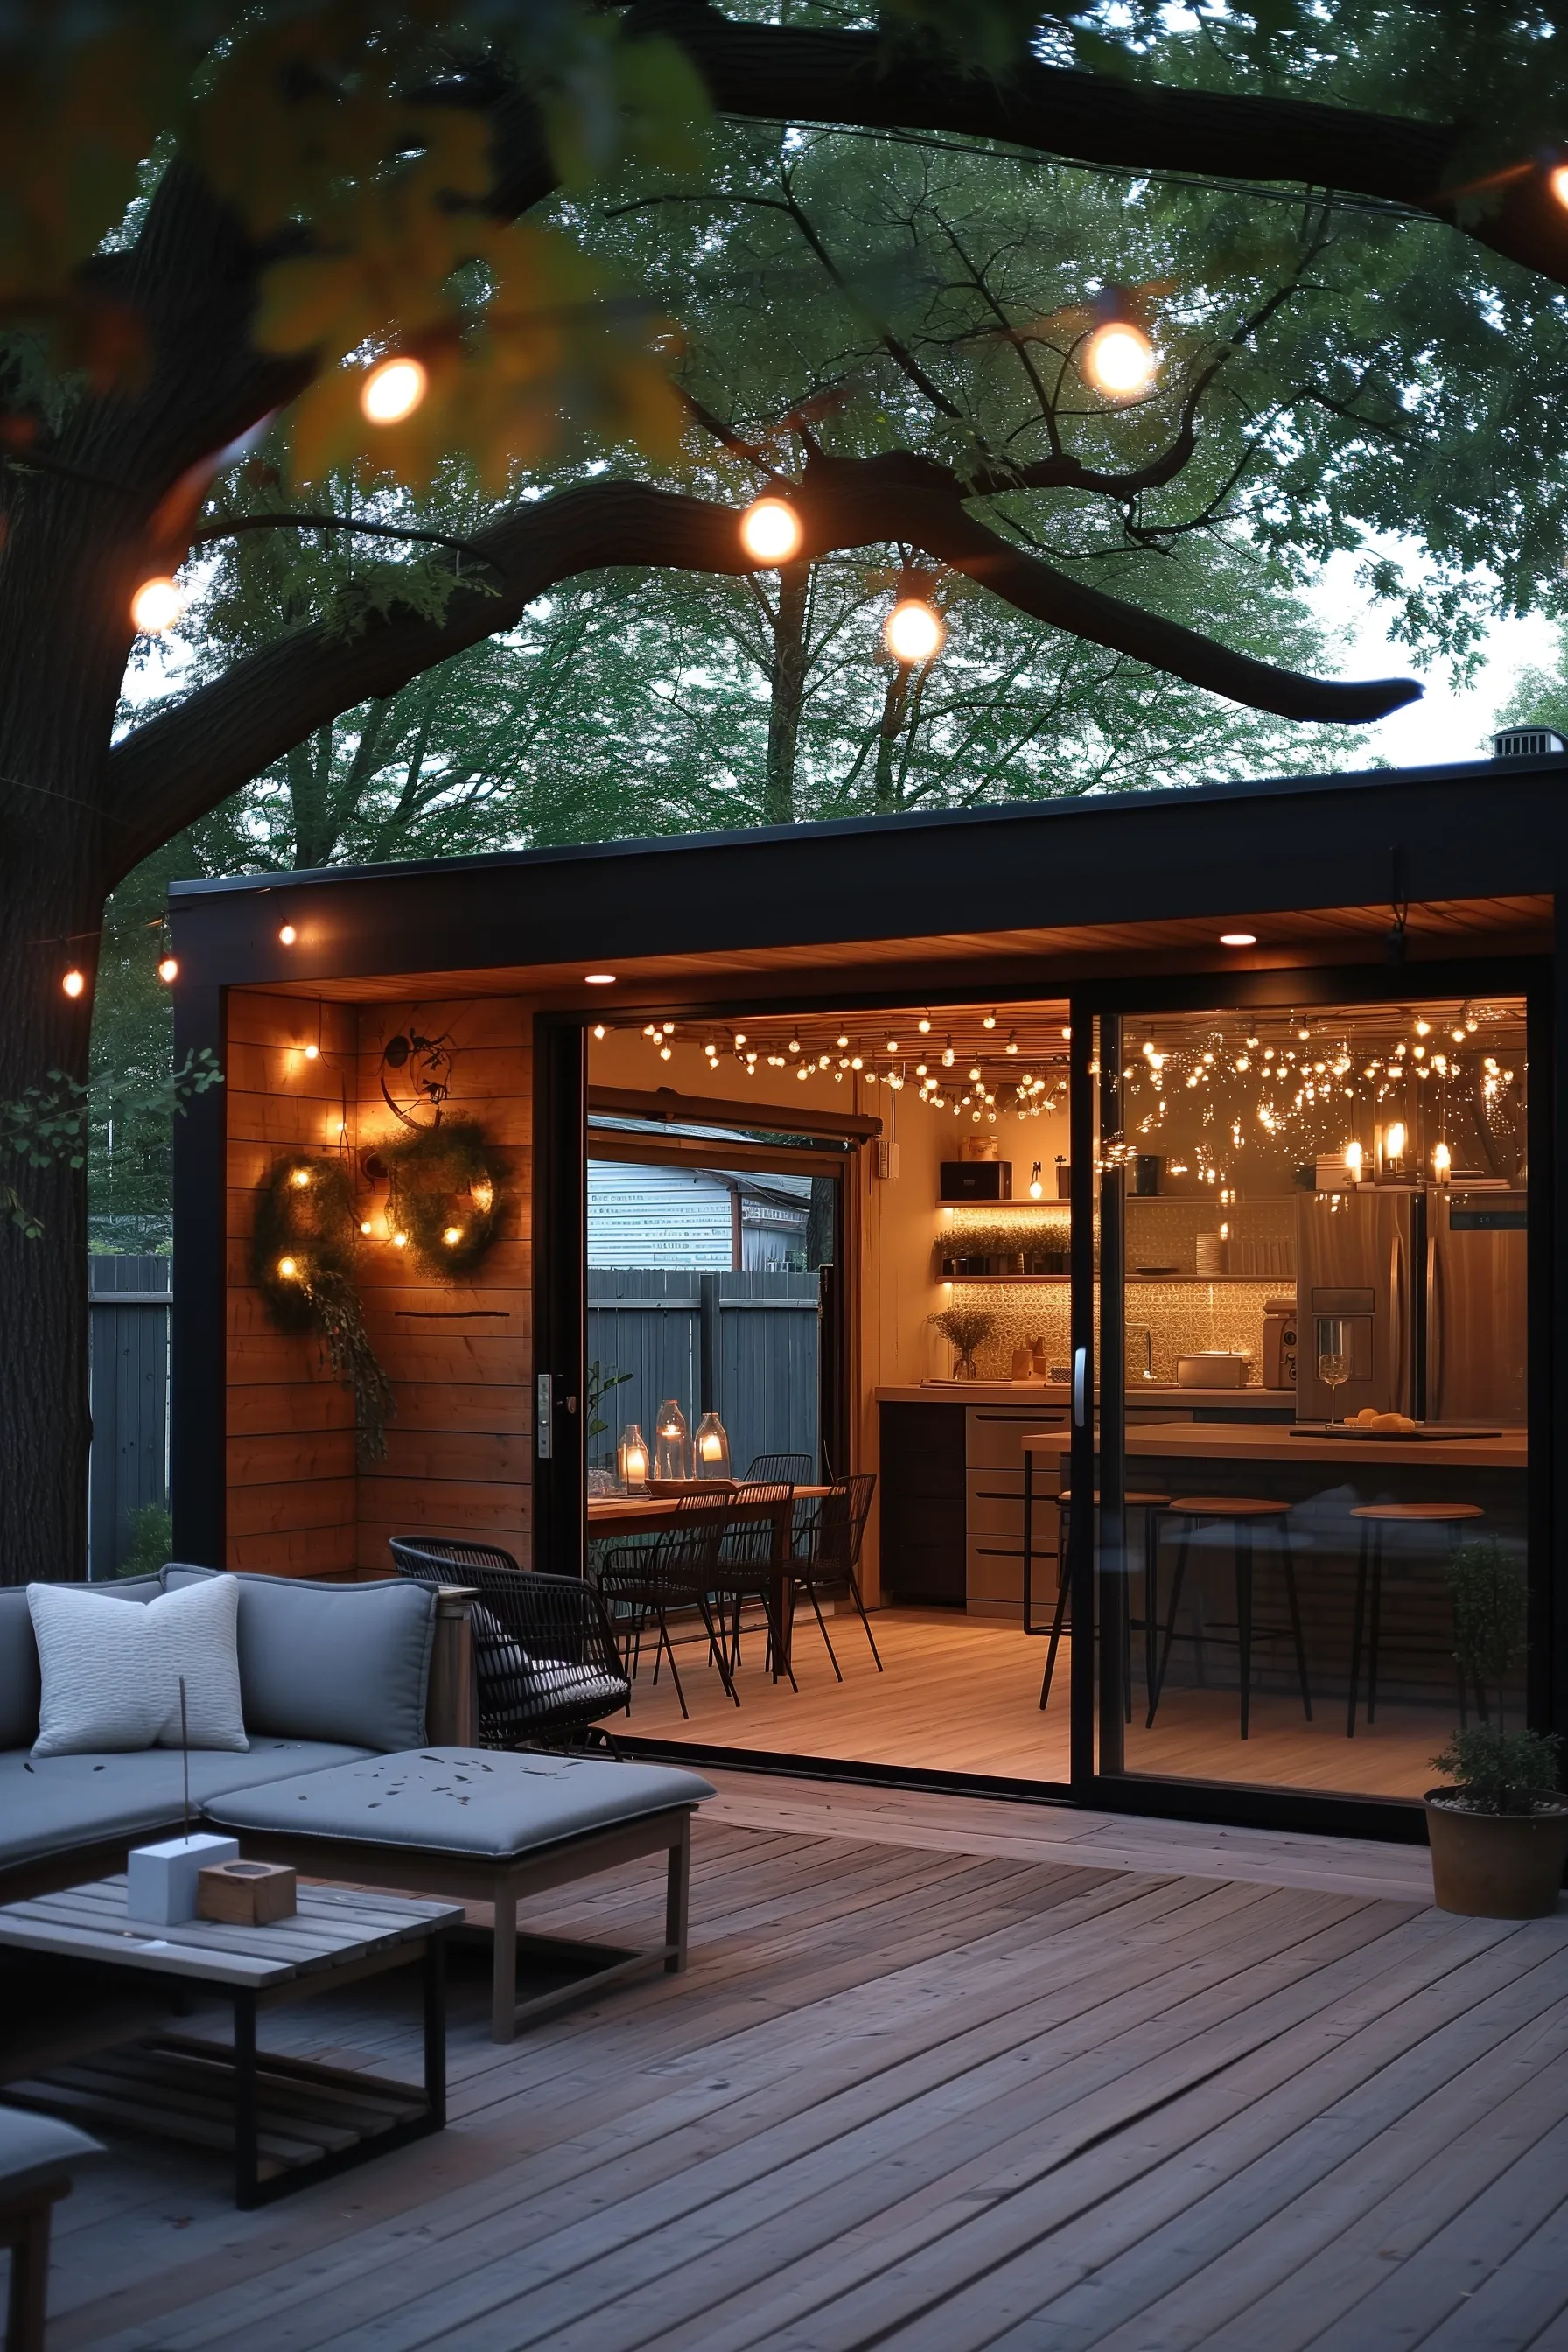 An outdoor man cave with fairy lights